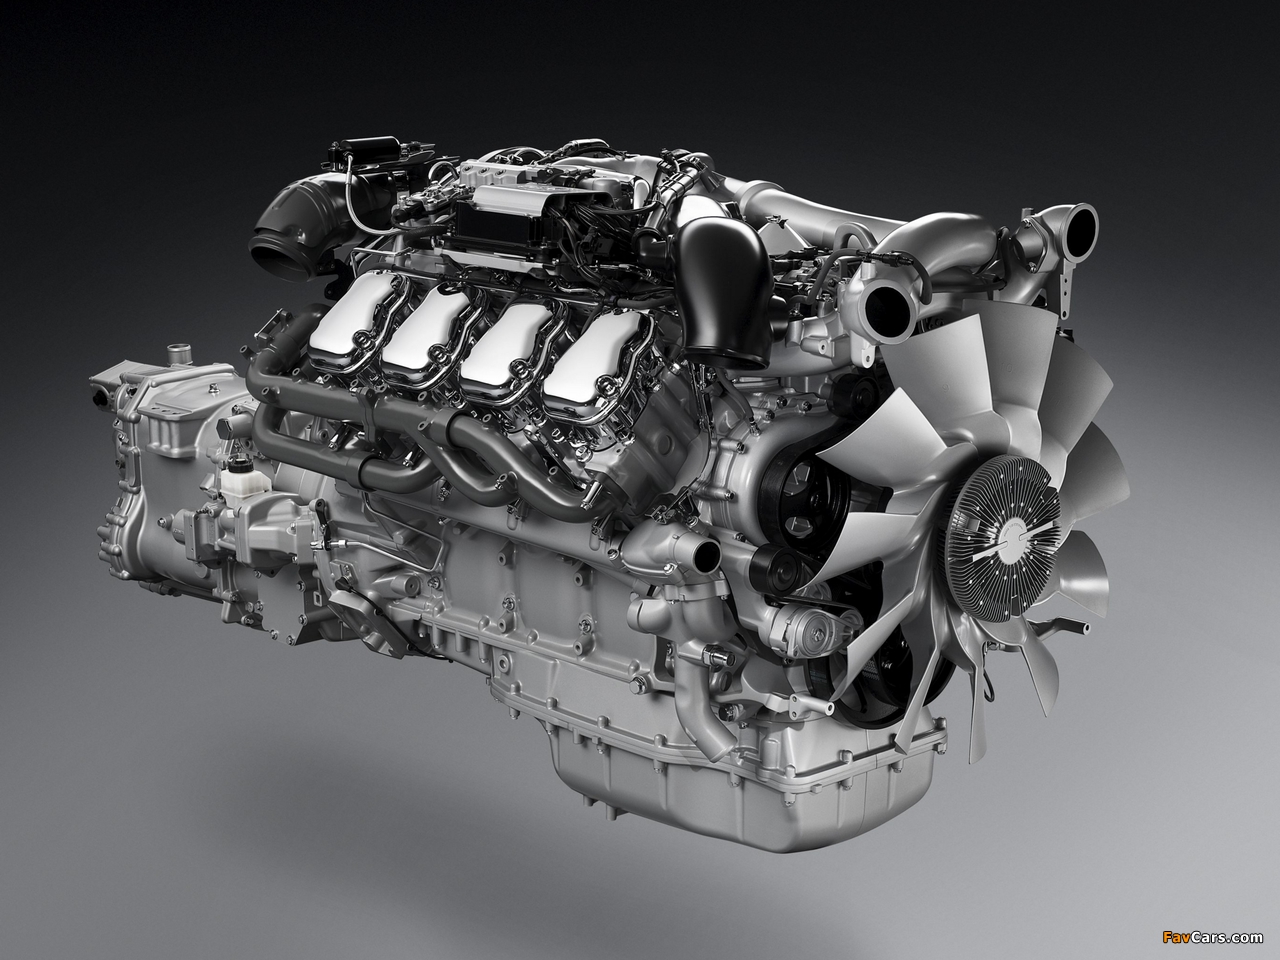 Images of Engines  Scania 730 hp 16.4-litre Euro 5 (1280 x 960)